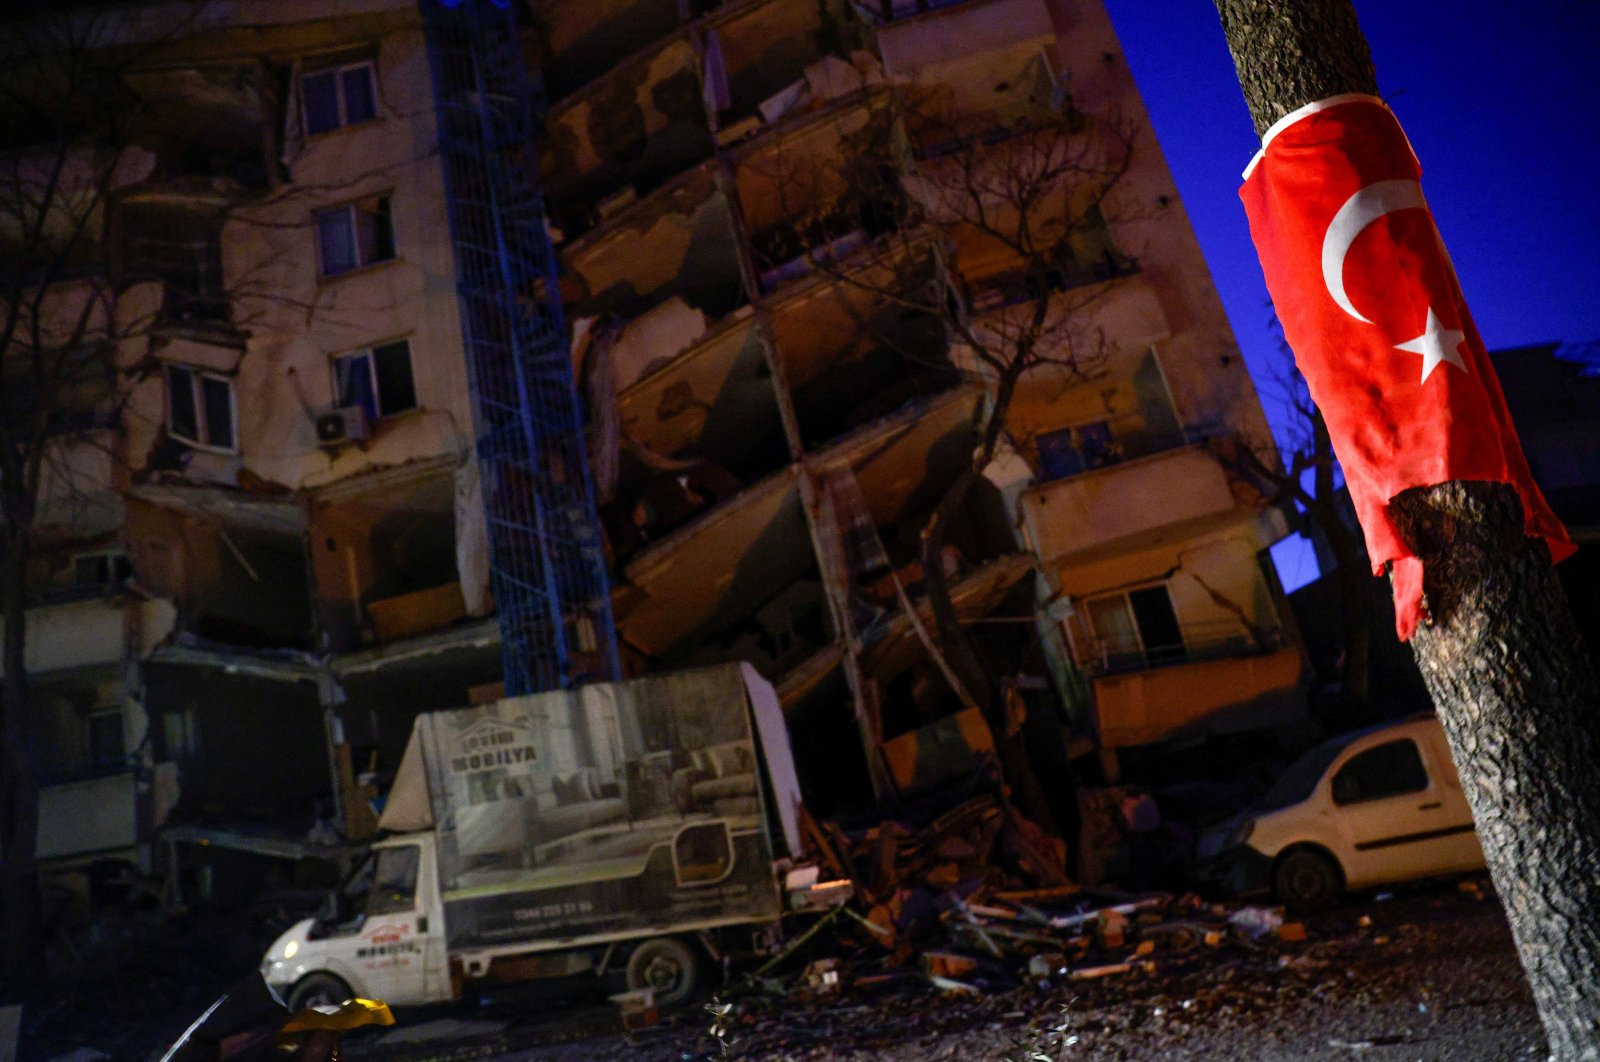 A Turkish flag is seen on a pole in front of a collapsed building, as rescues continue in the aftermath of a deadly earthquake in Kahramanmaraş, Türkiye, Feb. 12, 2023. (Reuters Photo)